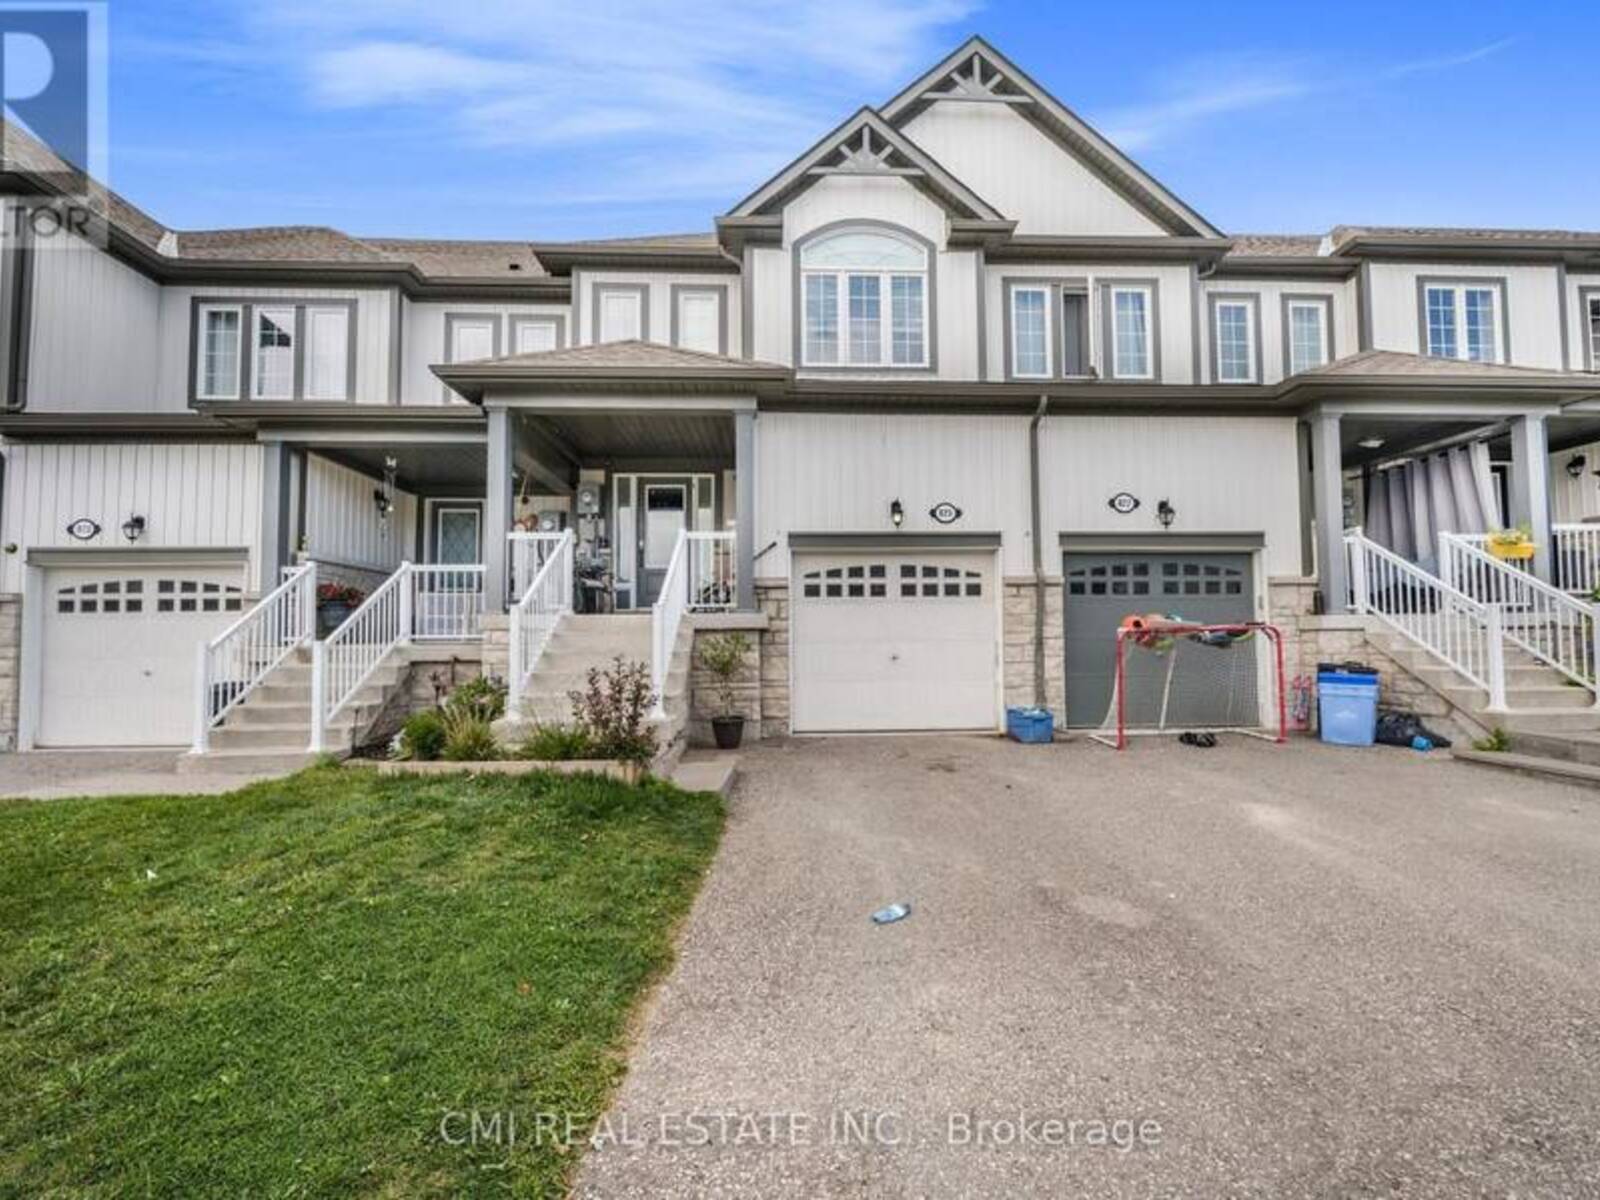 825 COOK CRES, Shelburne, Ontario L0N 1S1